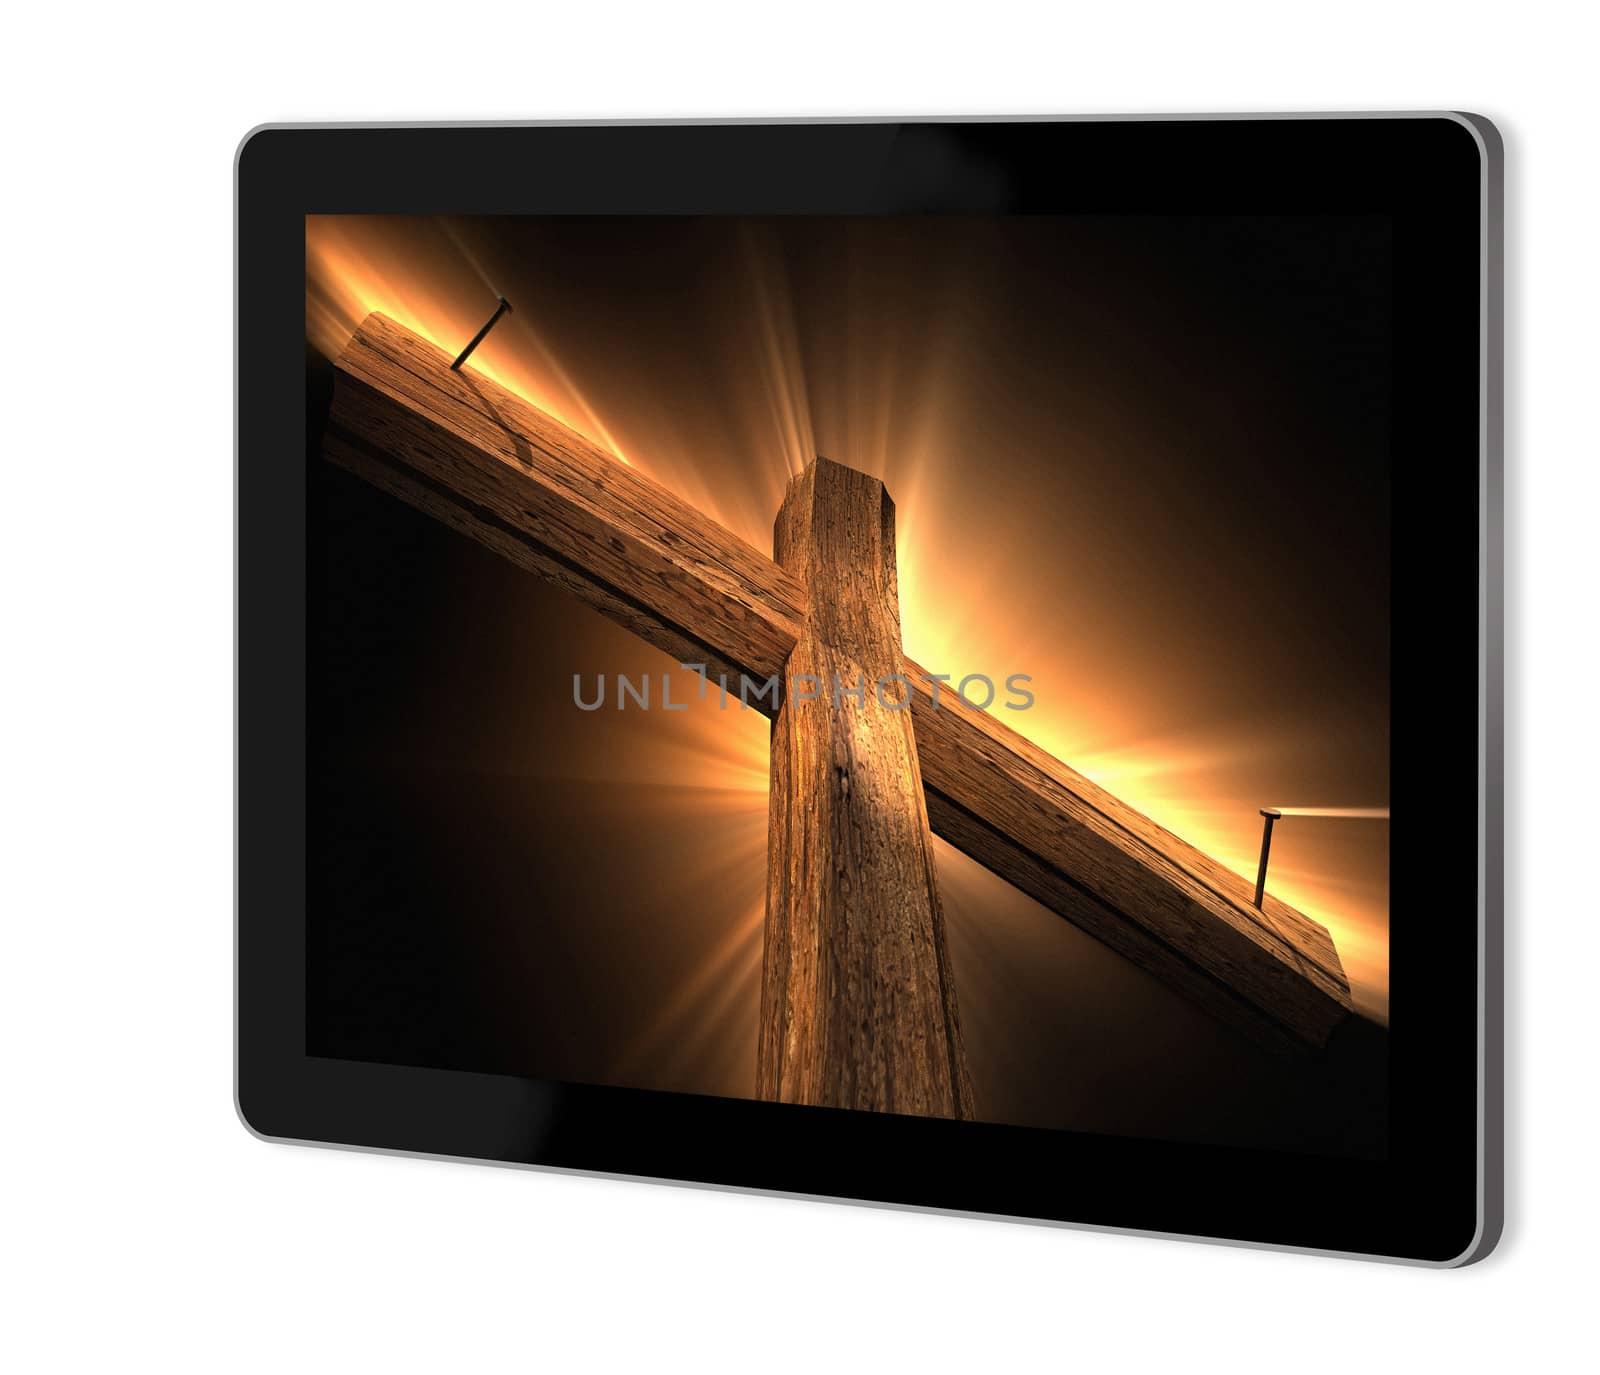 Wooden cross on screen of tablet  made in 3d software